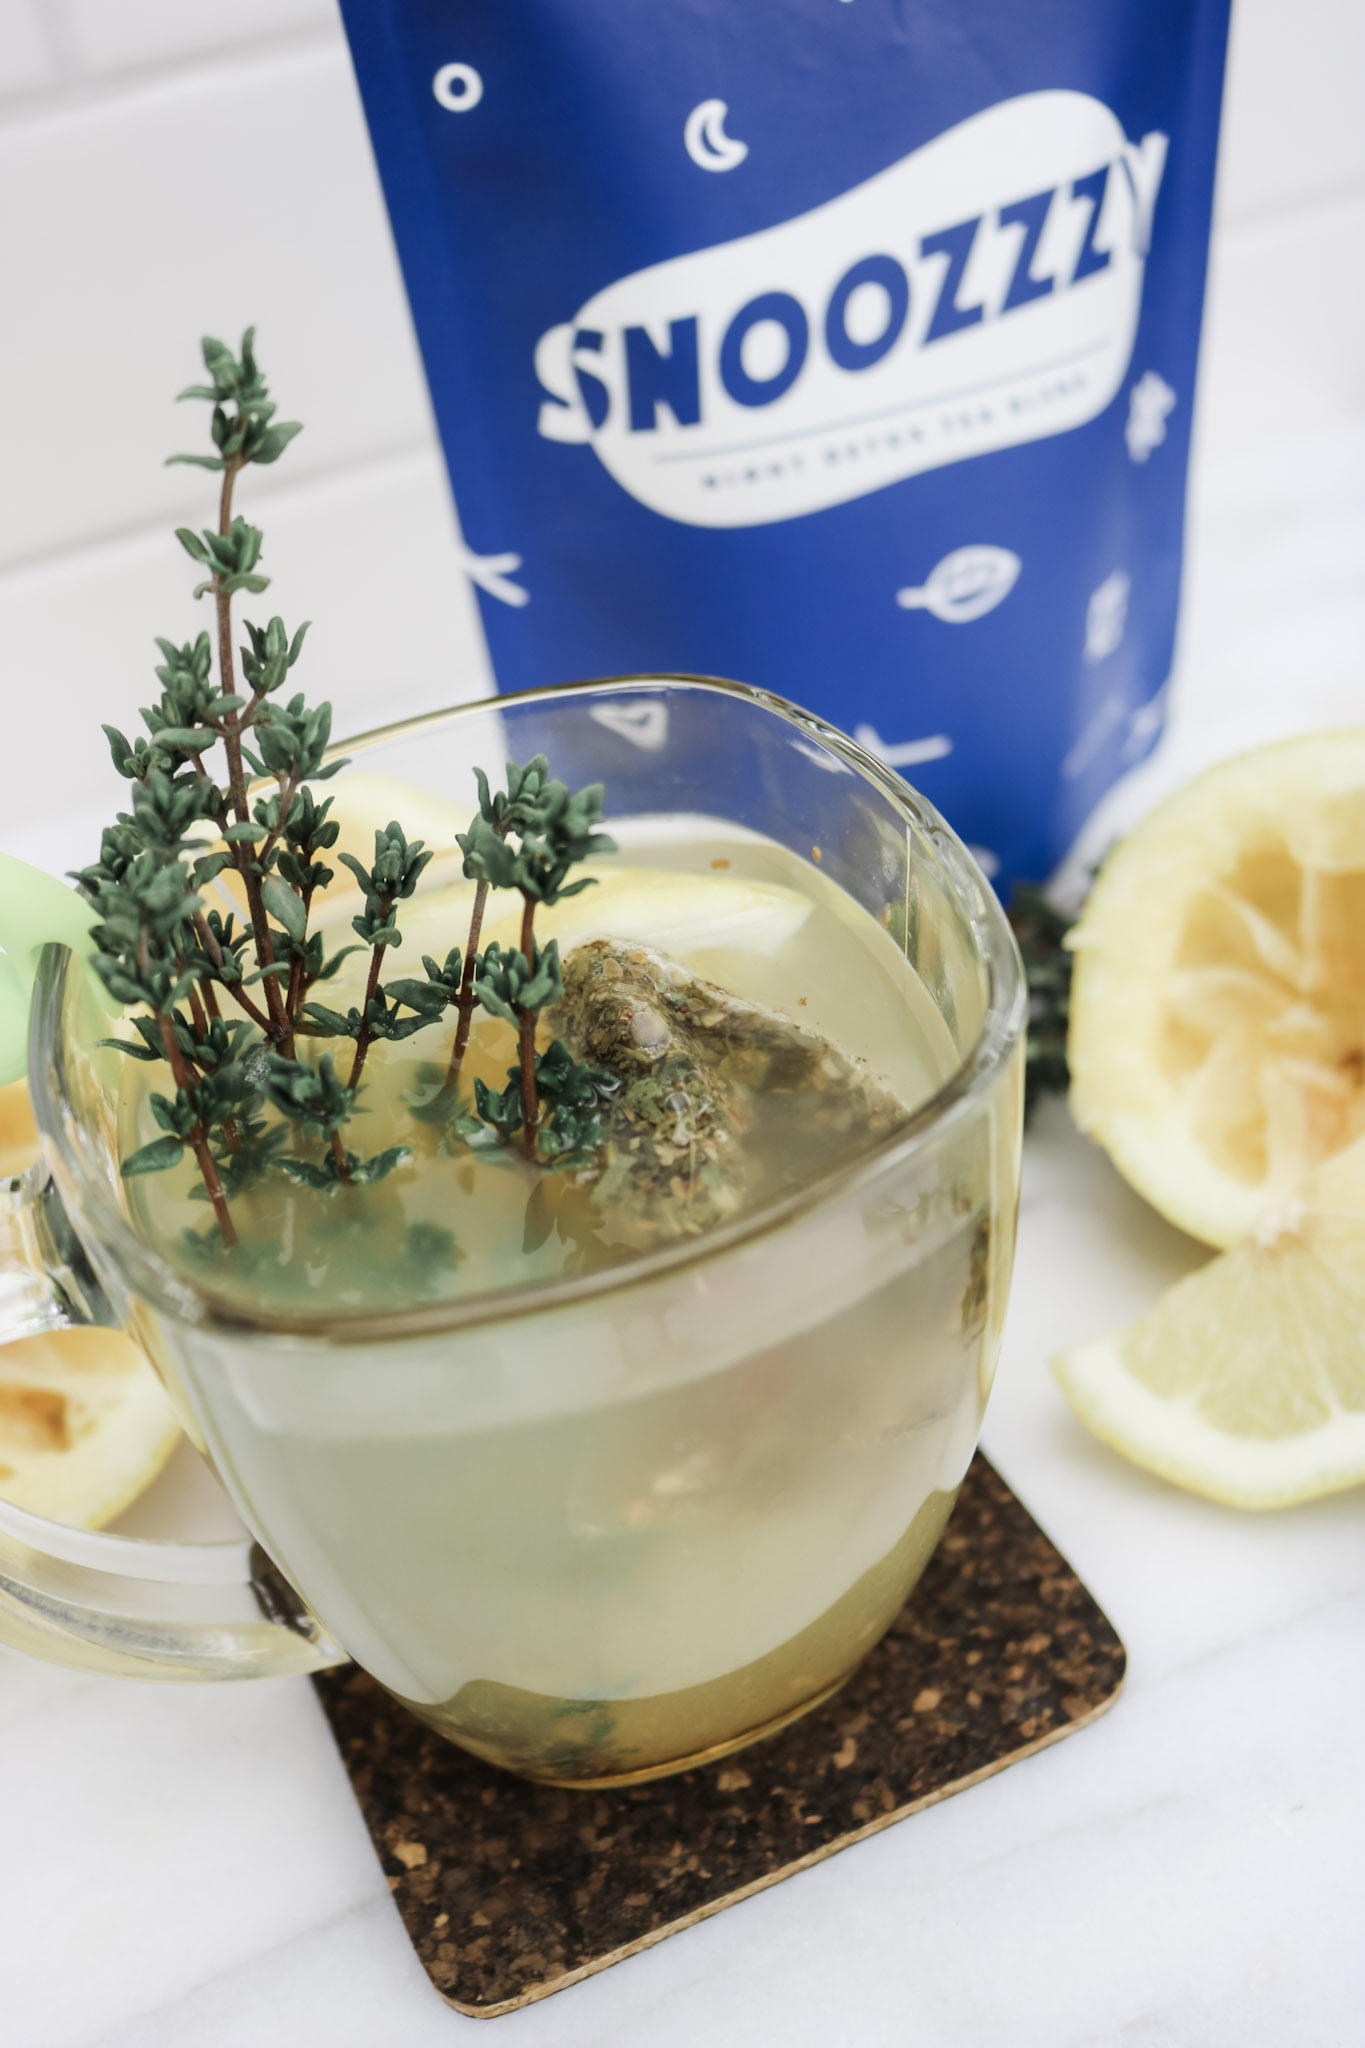 A mug of Snoozzzy tea is shown with ingredients used to make it surrounding it. A bag of Snoozzzy is behind it. 